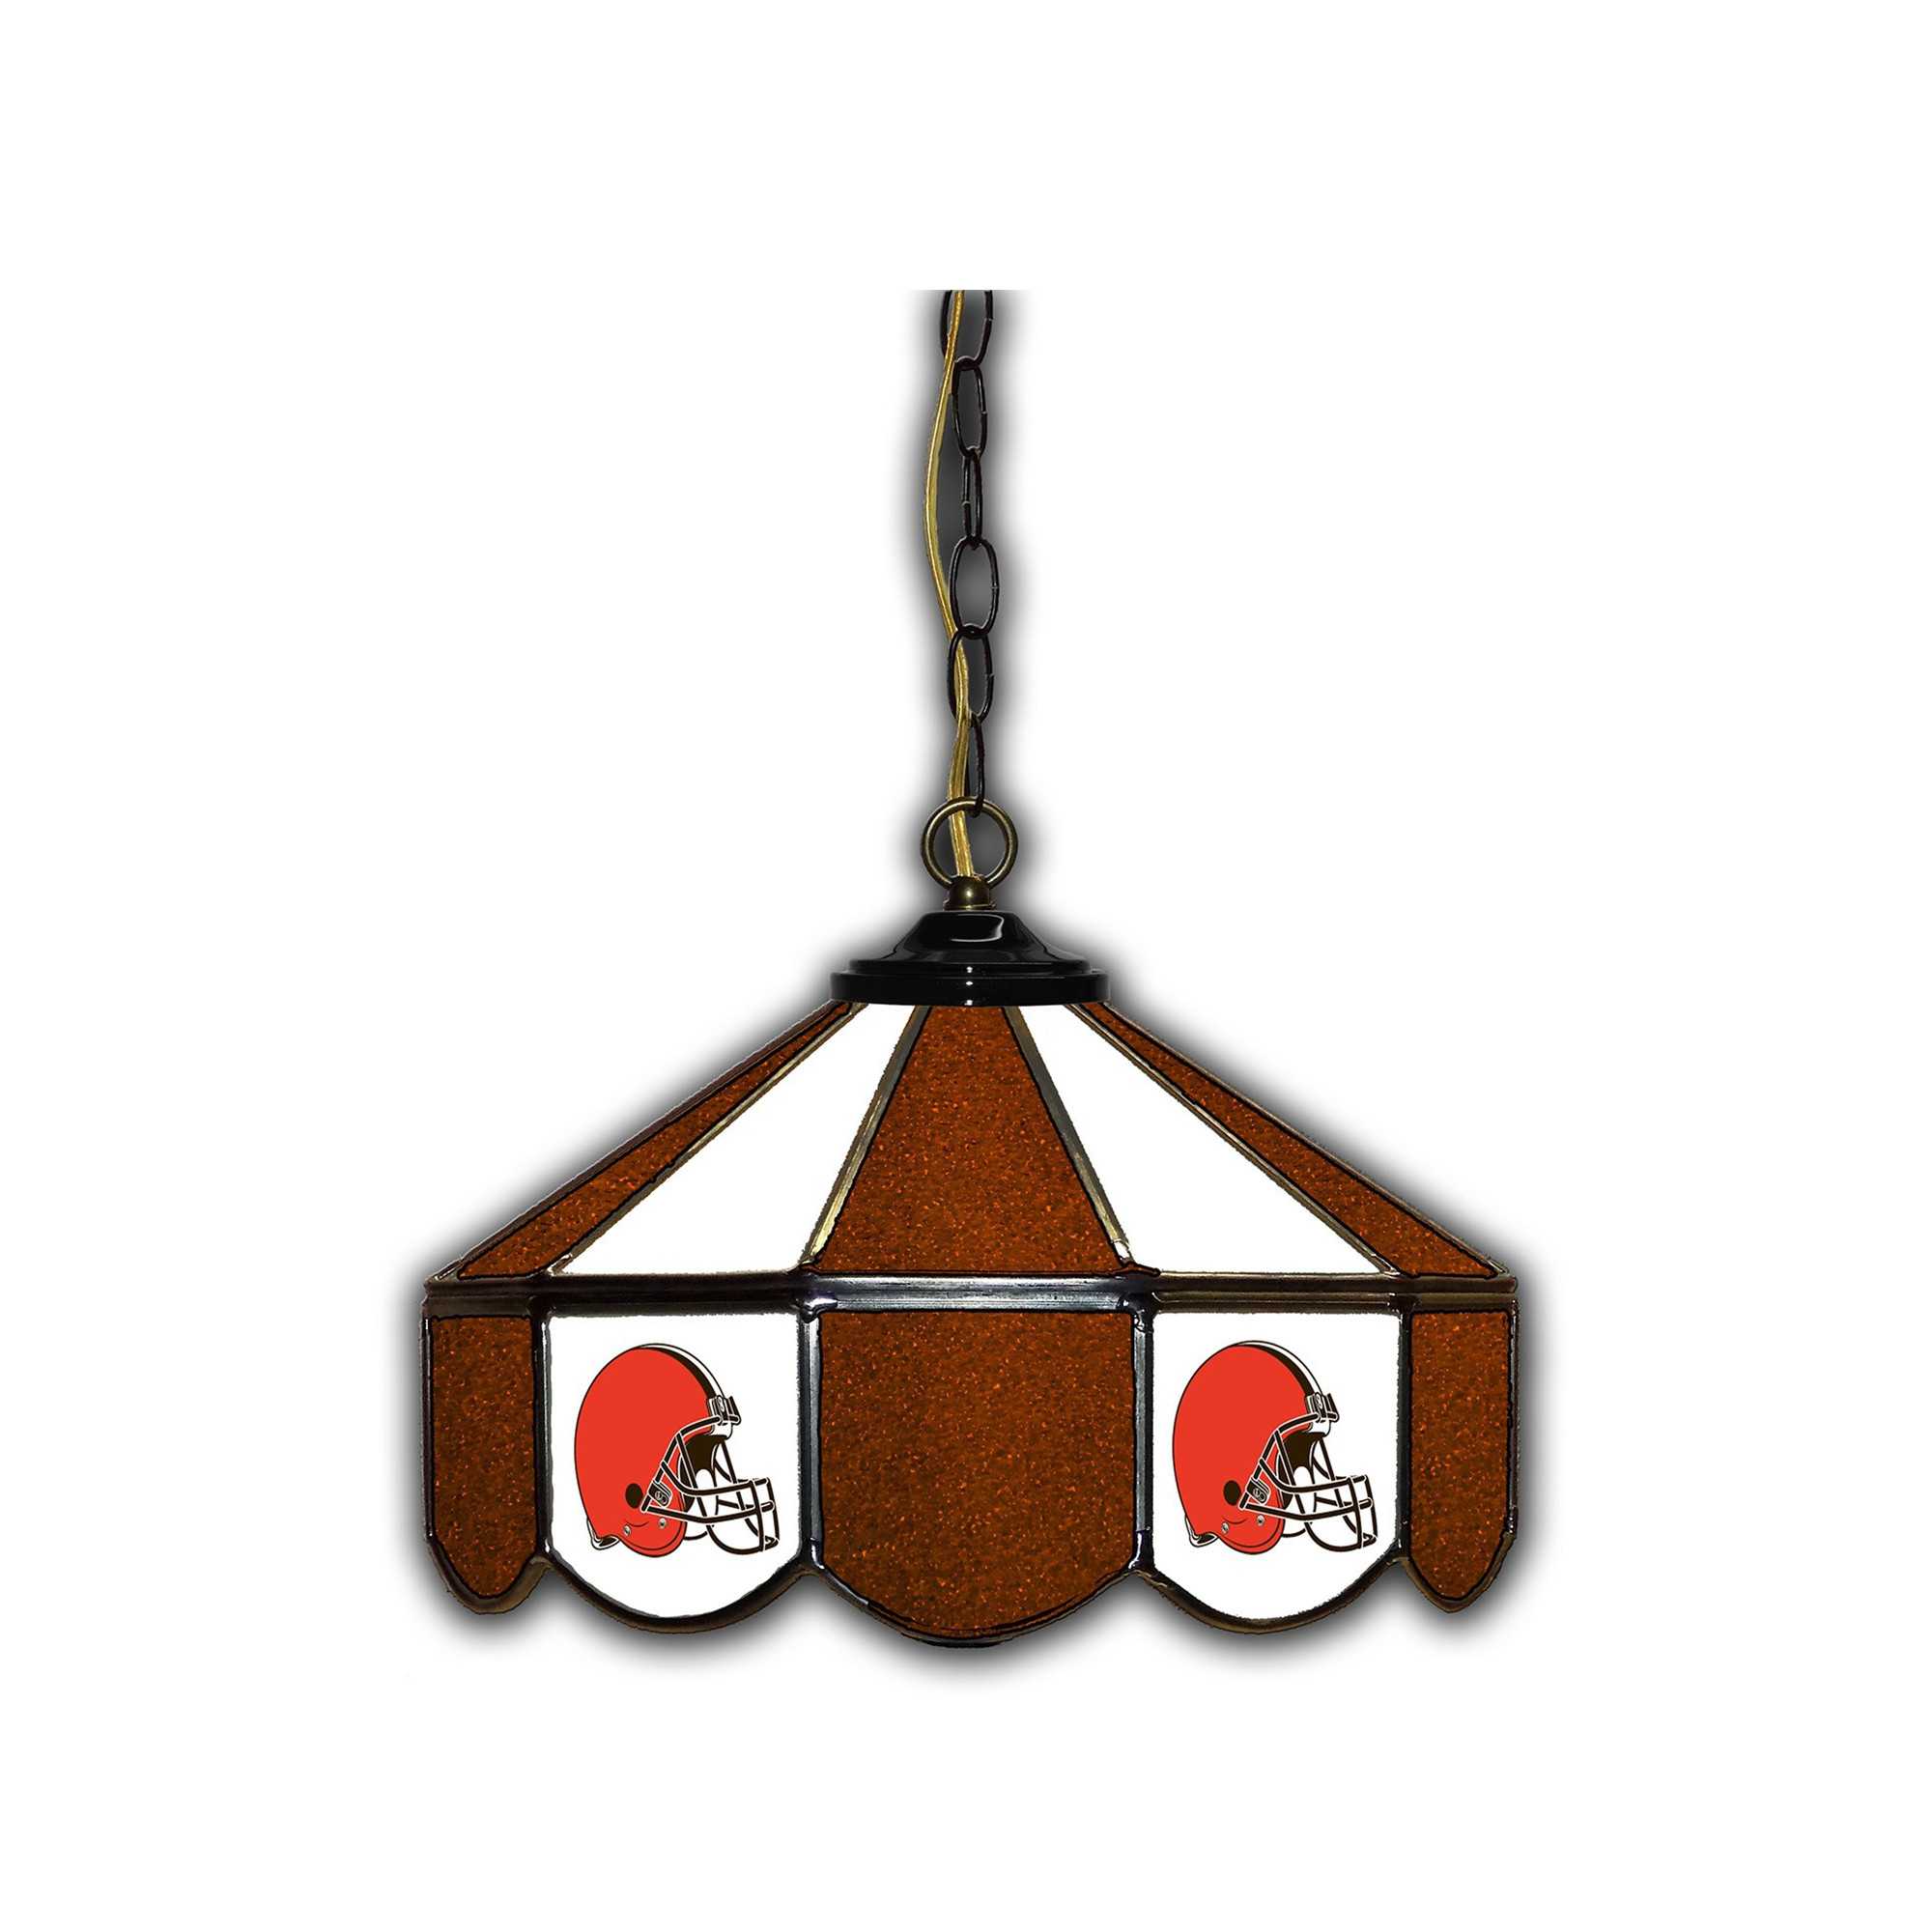 CLEVELAND BROWNS 14" GLASS PUB LAMP